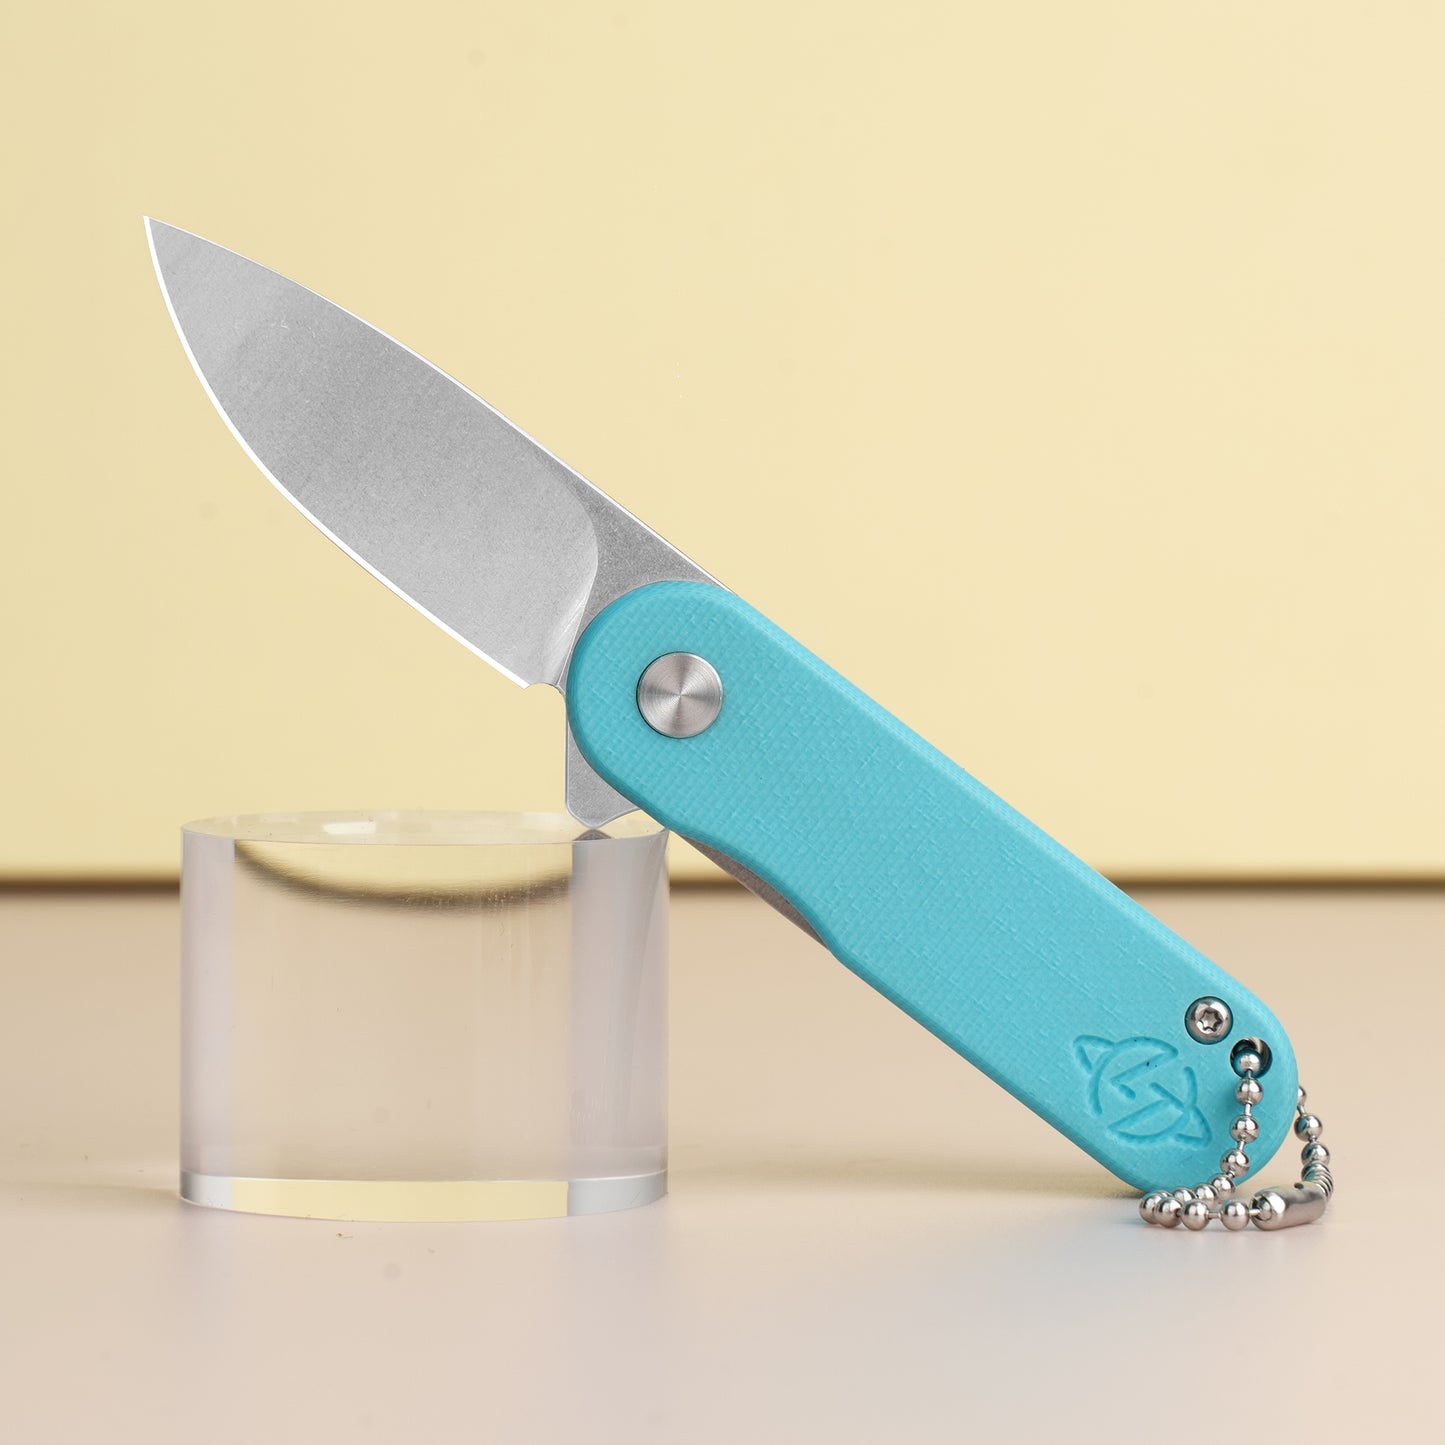 G048 Mini Folding Knife 1.93" D2 Blade White G10 Handle, Small Folding Knife with Deep Carry Pocket Clip For EDC